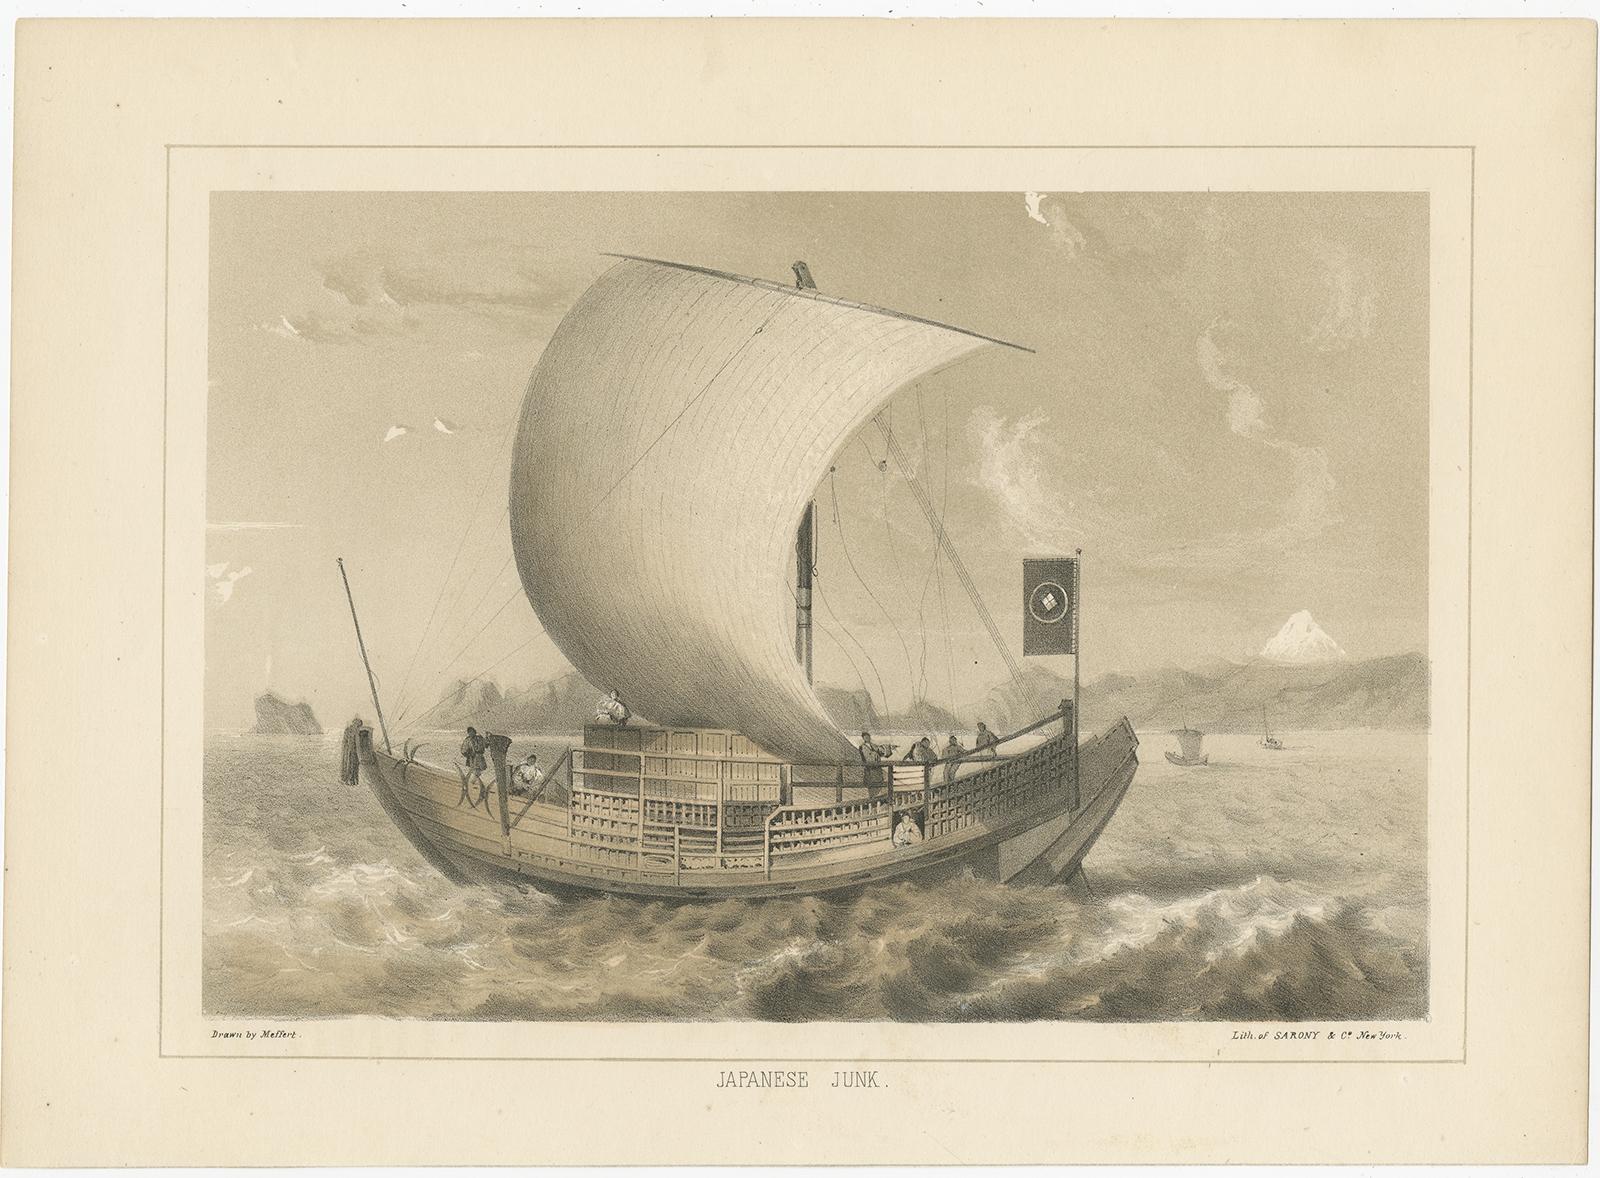 Antique print titled ‘Japanese Junk'. 

Lithograph of a Japanese junk, a type of sailing ship. This print originates from 'Narrative of the expedition of an American squadron to the China seas and Japan, performed in the years 1852, 1853, and